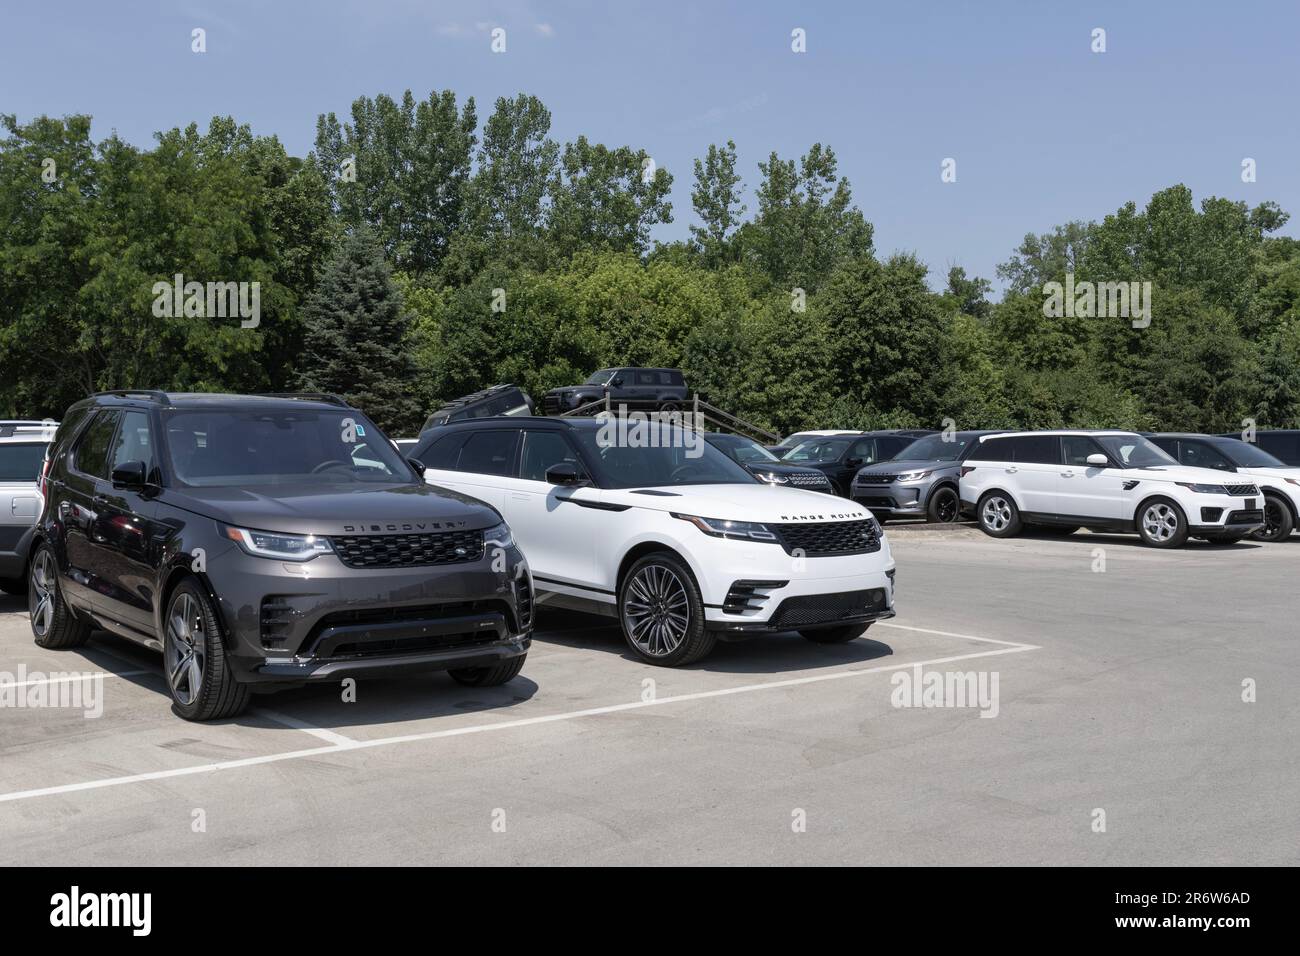 Indianapolis - June 10, 2023: Land Rover SUV dealership. Land Rover offers the Range Rover, Evoque, Defender, and Discovery SUVs. Stock Photo